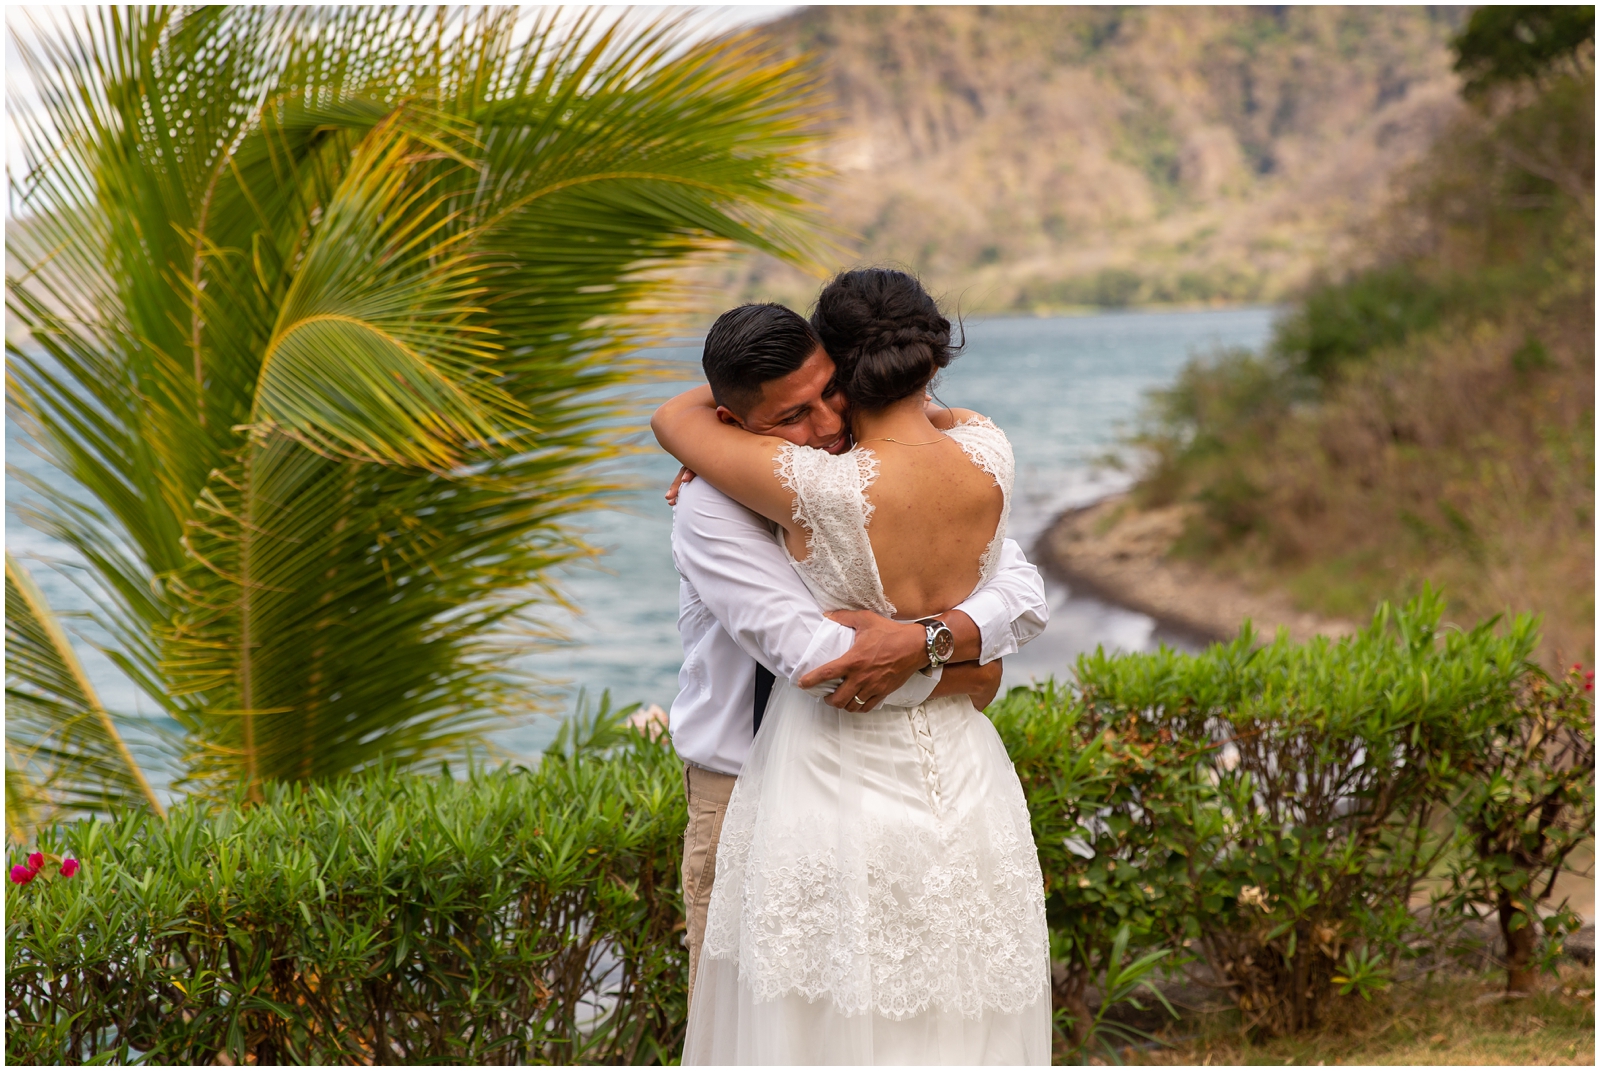 A couple hugging after their intimate first look on a lake.